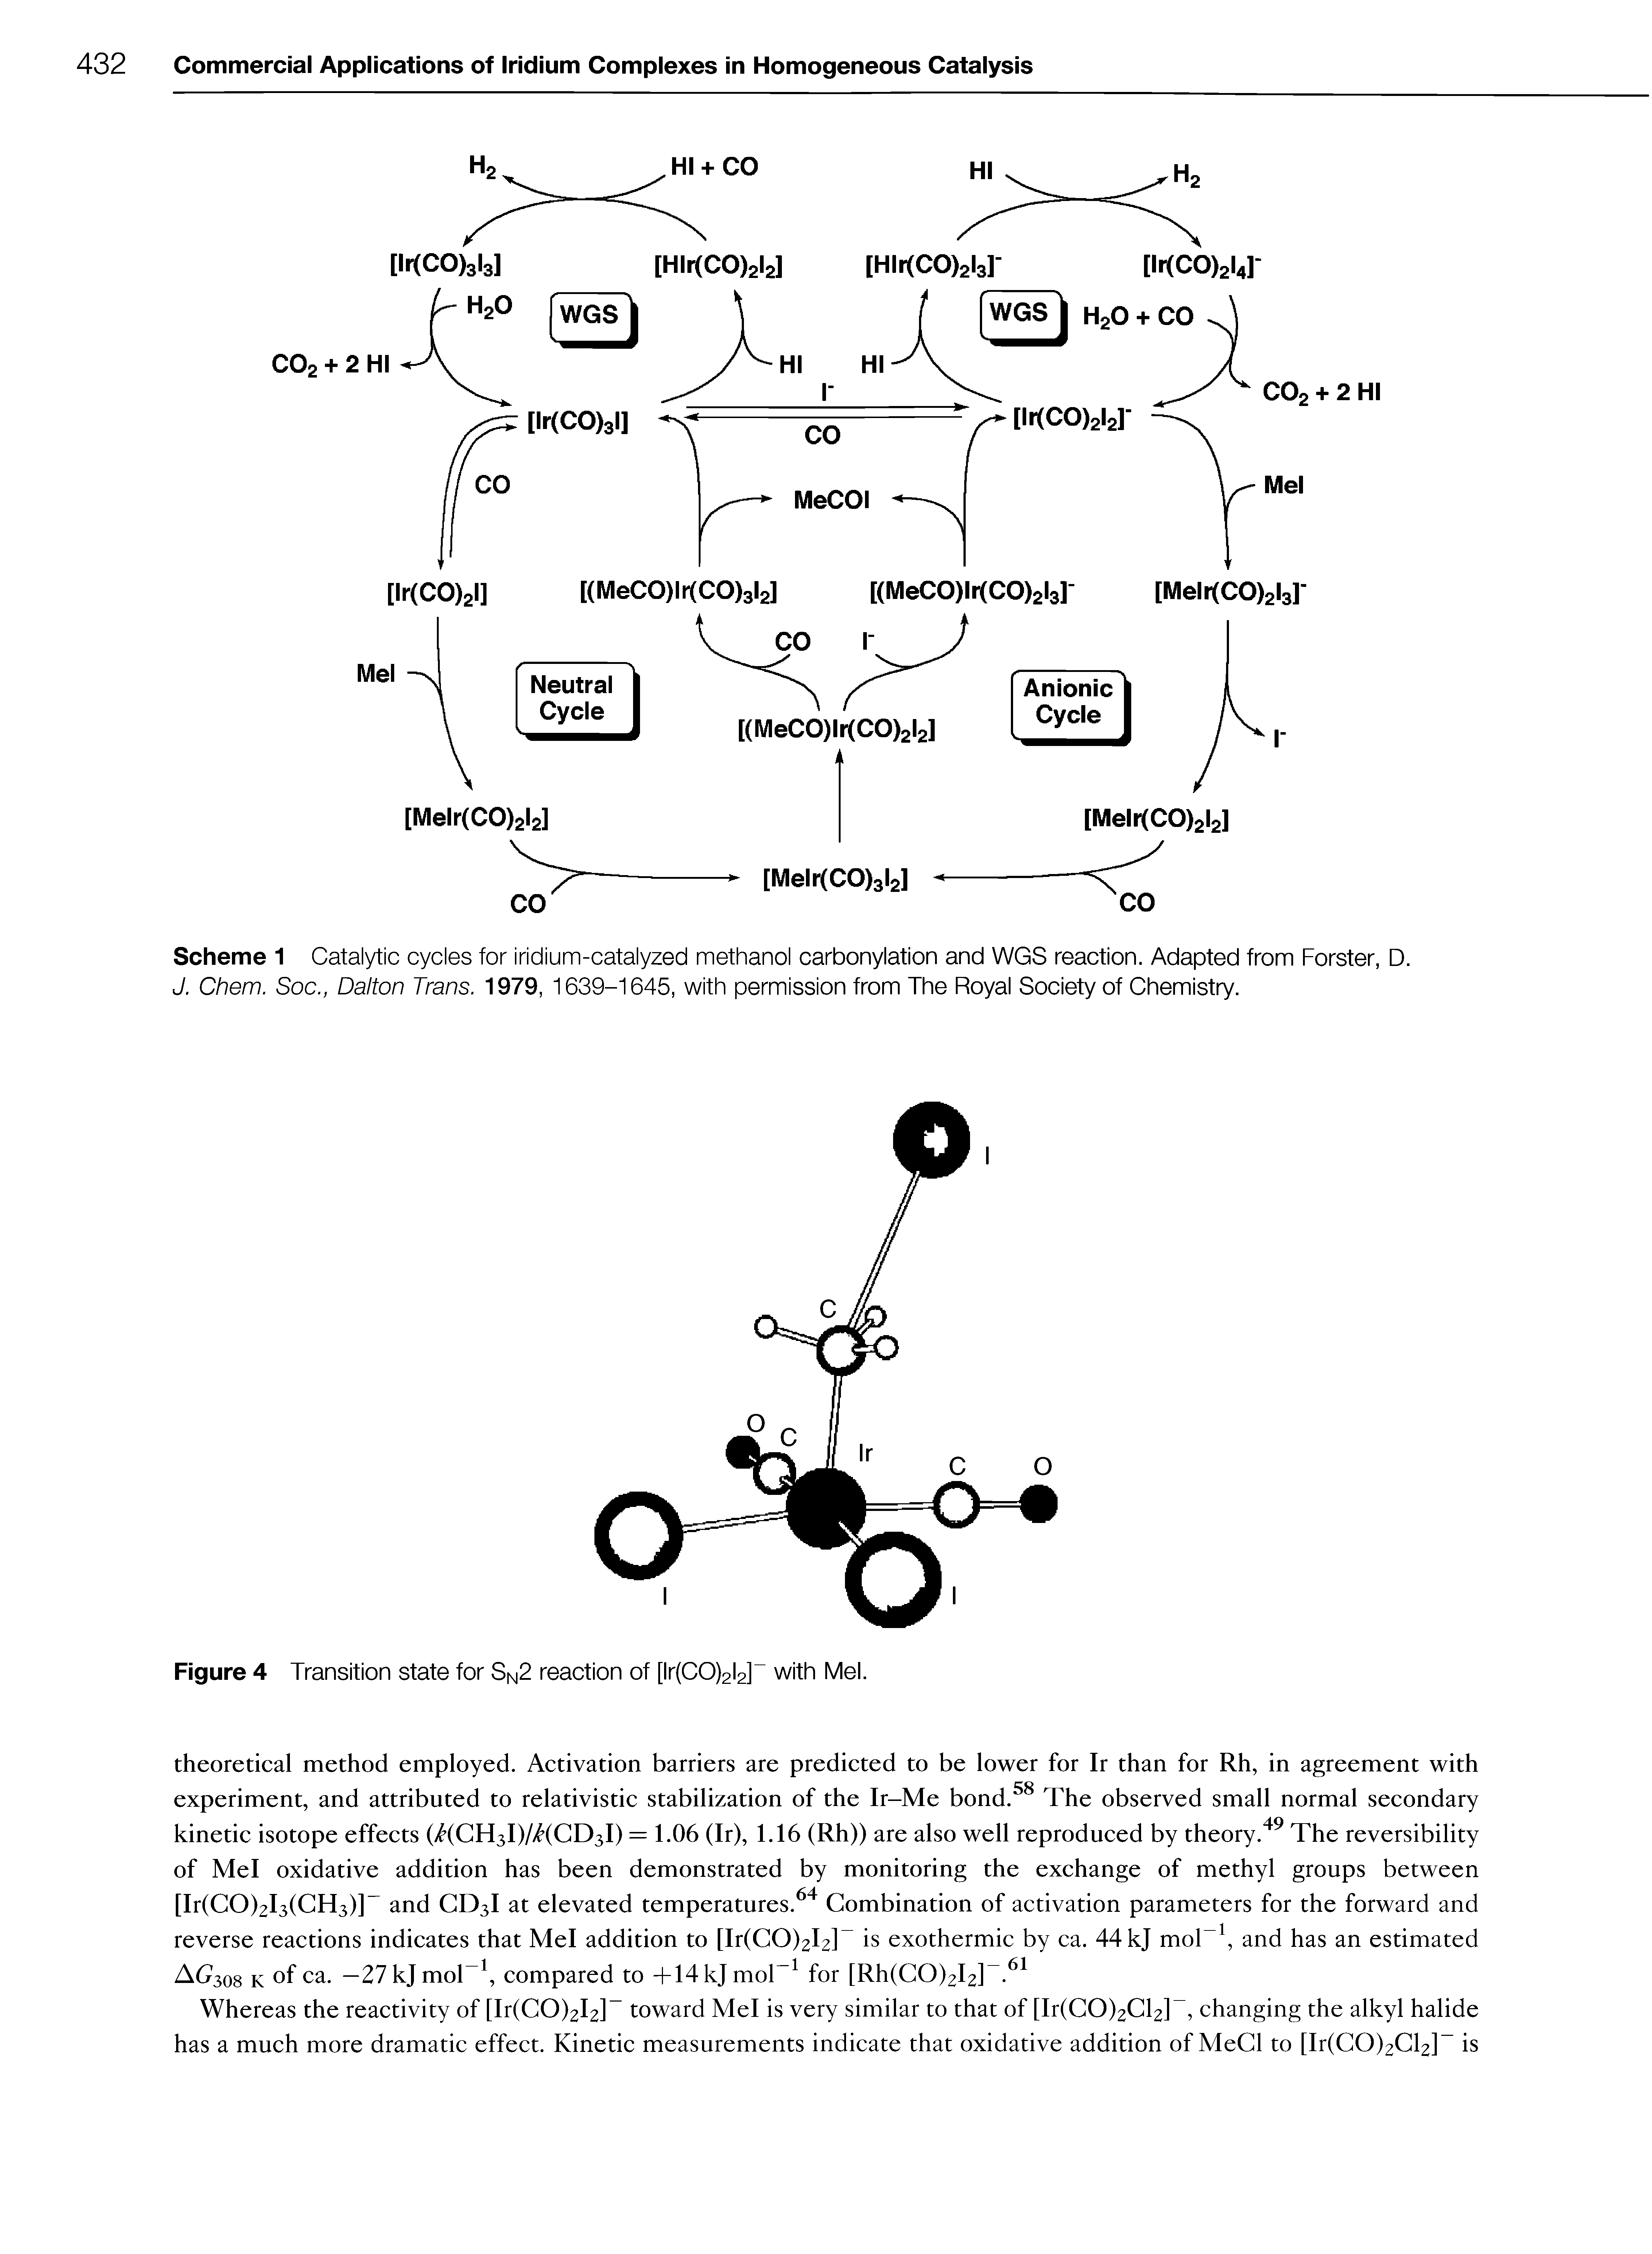 Scheme 1 Catalytic cycles for iridium-catalyzed methanol carbonylation and WGS reaction. Adapted from Forster, D. J. Chem. Soc., Dalton Trans. 1979, 1639-1645, with permission from The Royal Society of Chemistry.